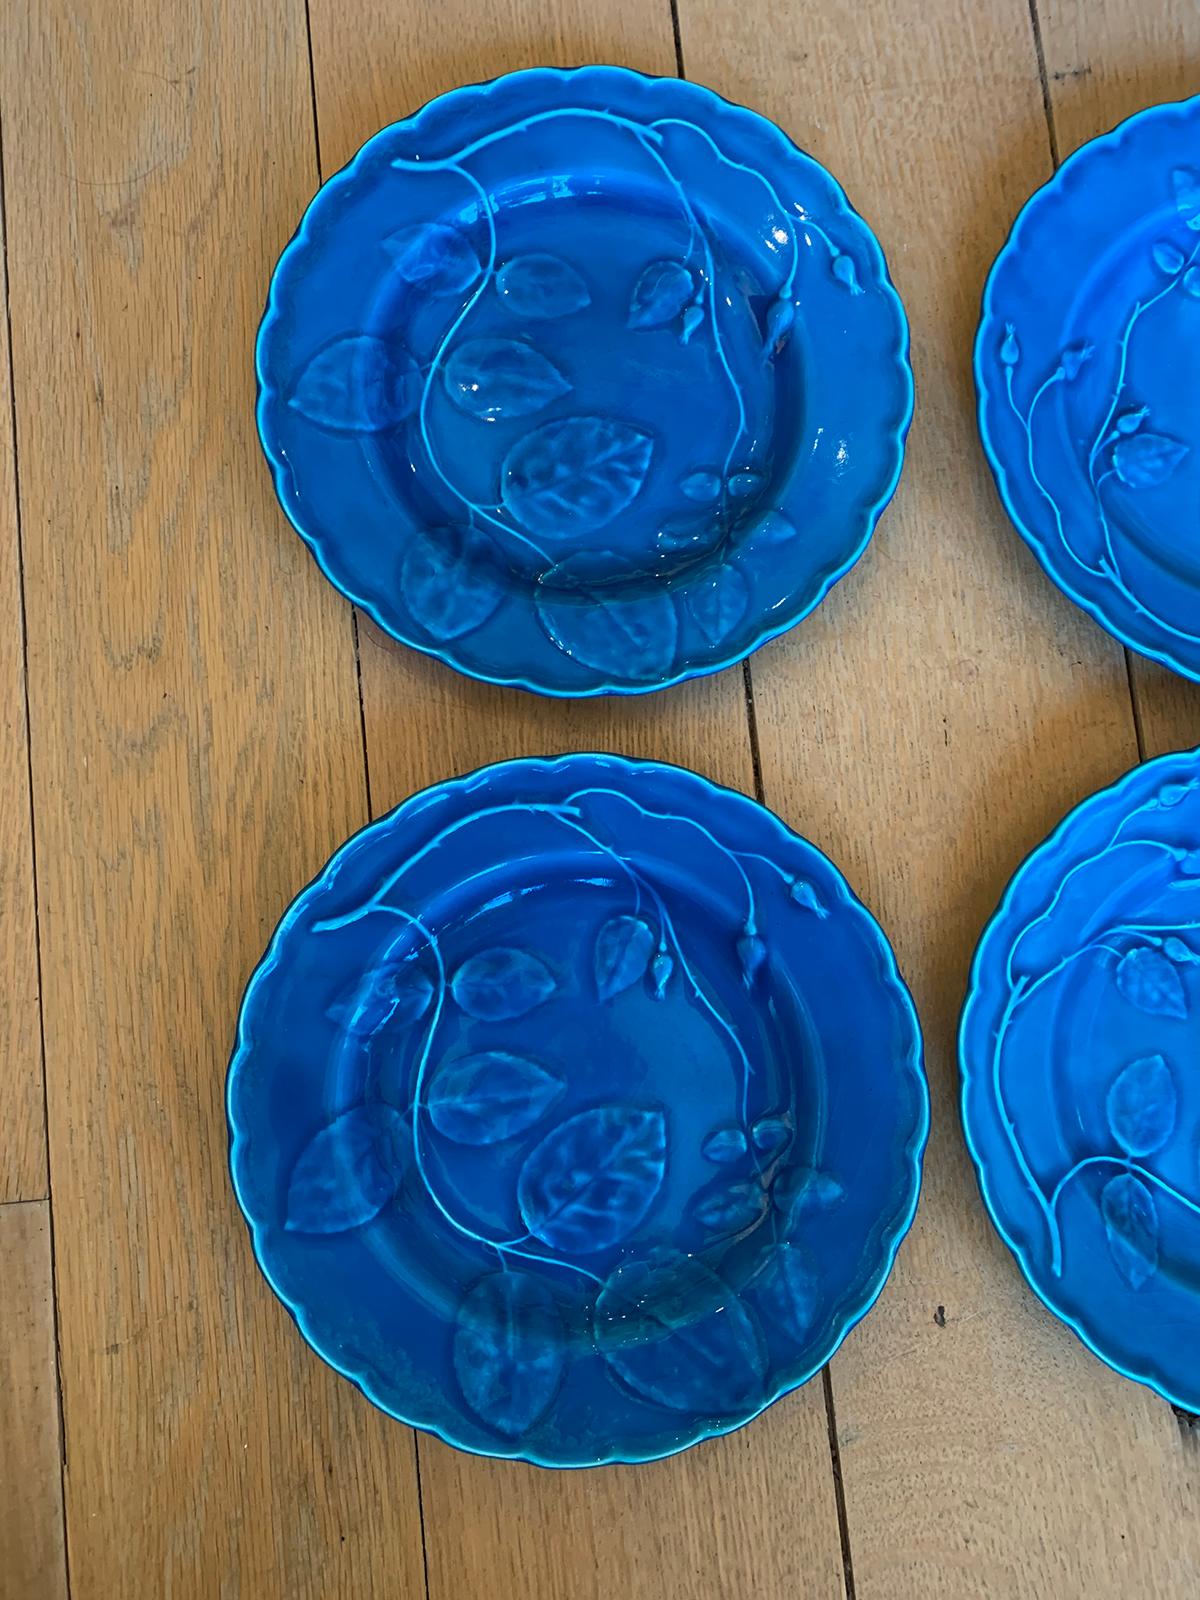 Set of Four circa 1875 Blue Minton Plates after Royal Worcester's 